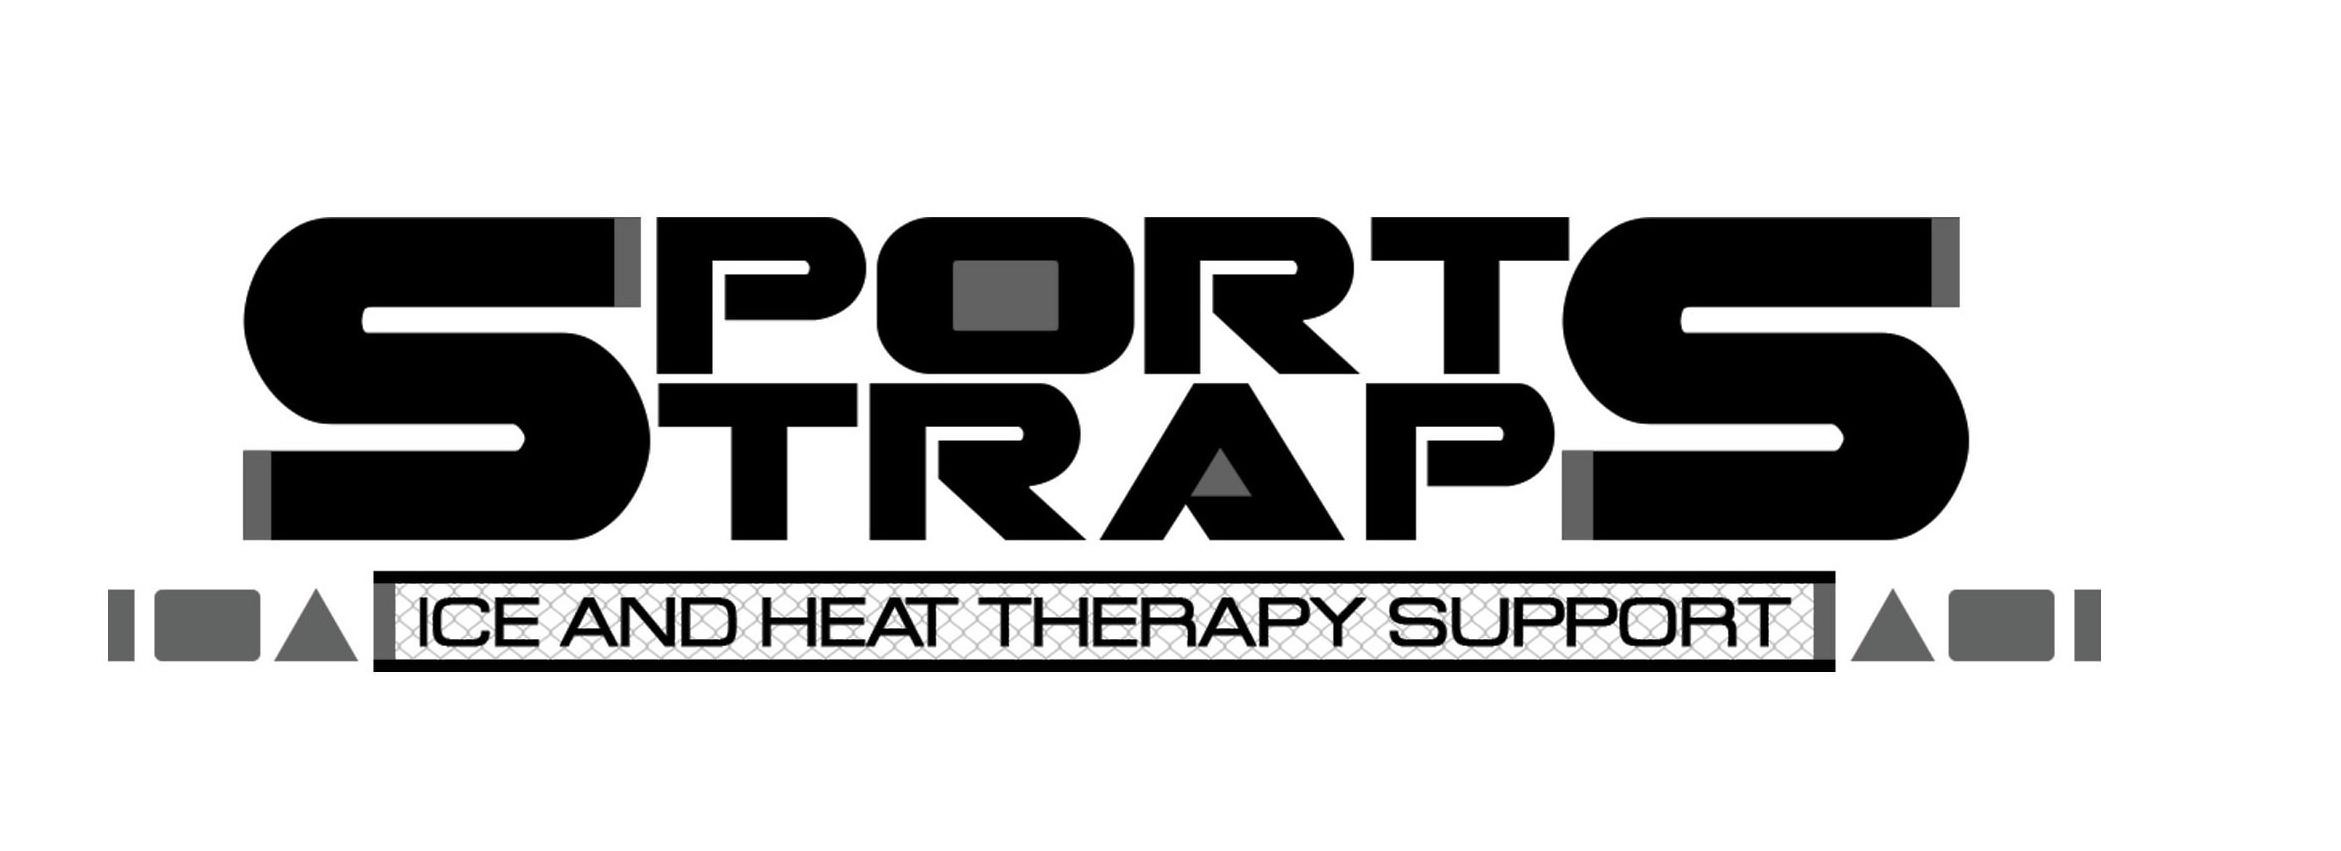  SPORTS STRAPS ICE AND HEAT THERAPY SUPPORT